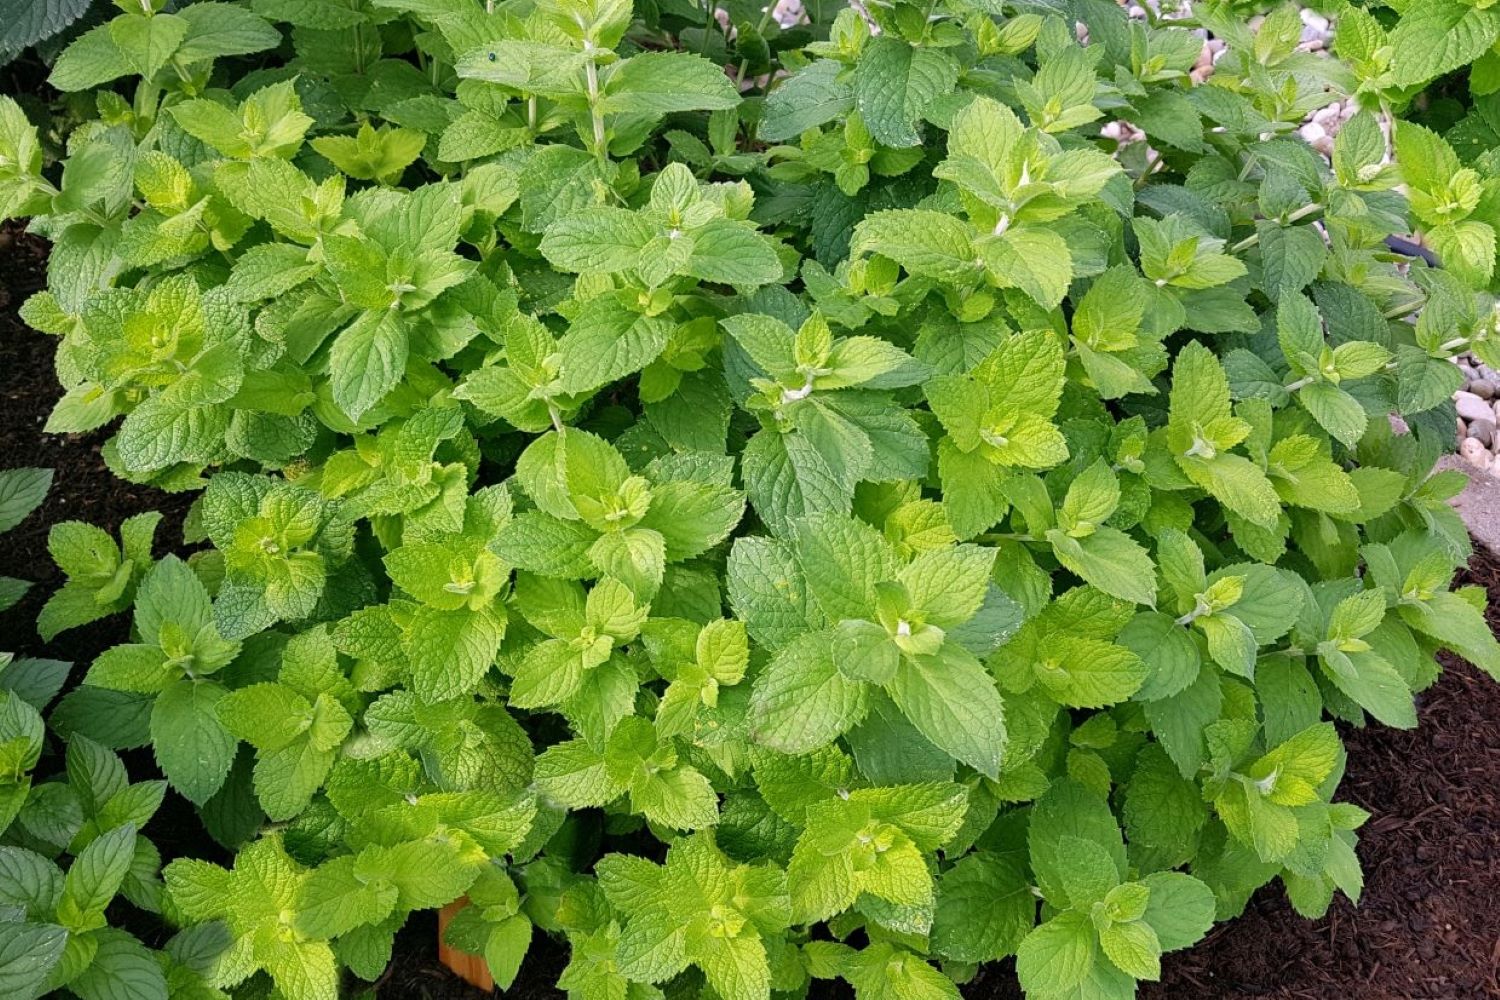 Apple mint: how to grow, care for & use - Plantura